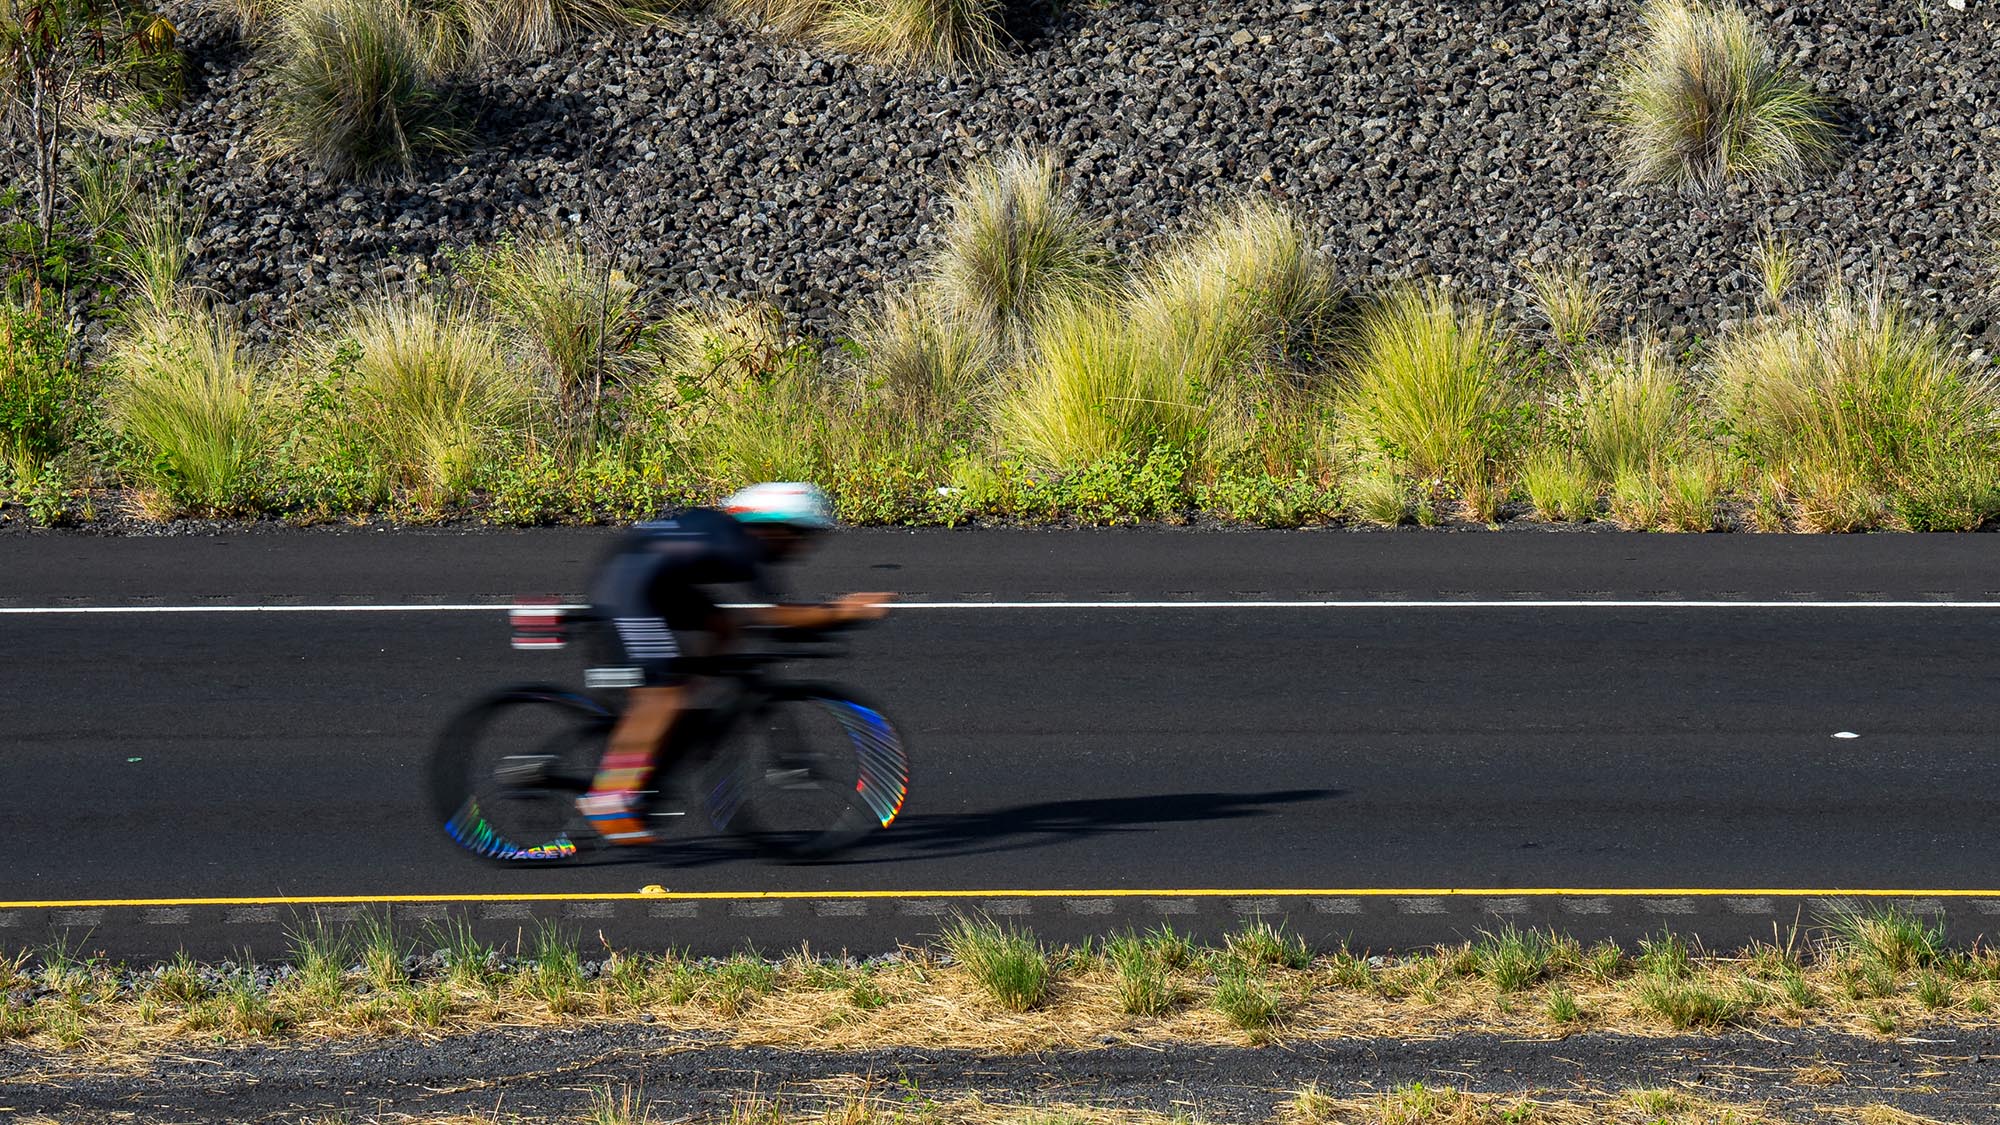 A Cyclist Is A Blur In A Slow Shutter Image Of A Highway Near Kona, Hi.